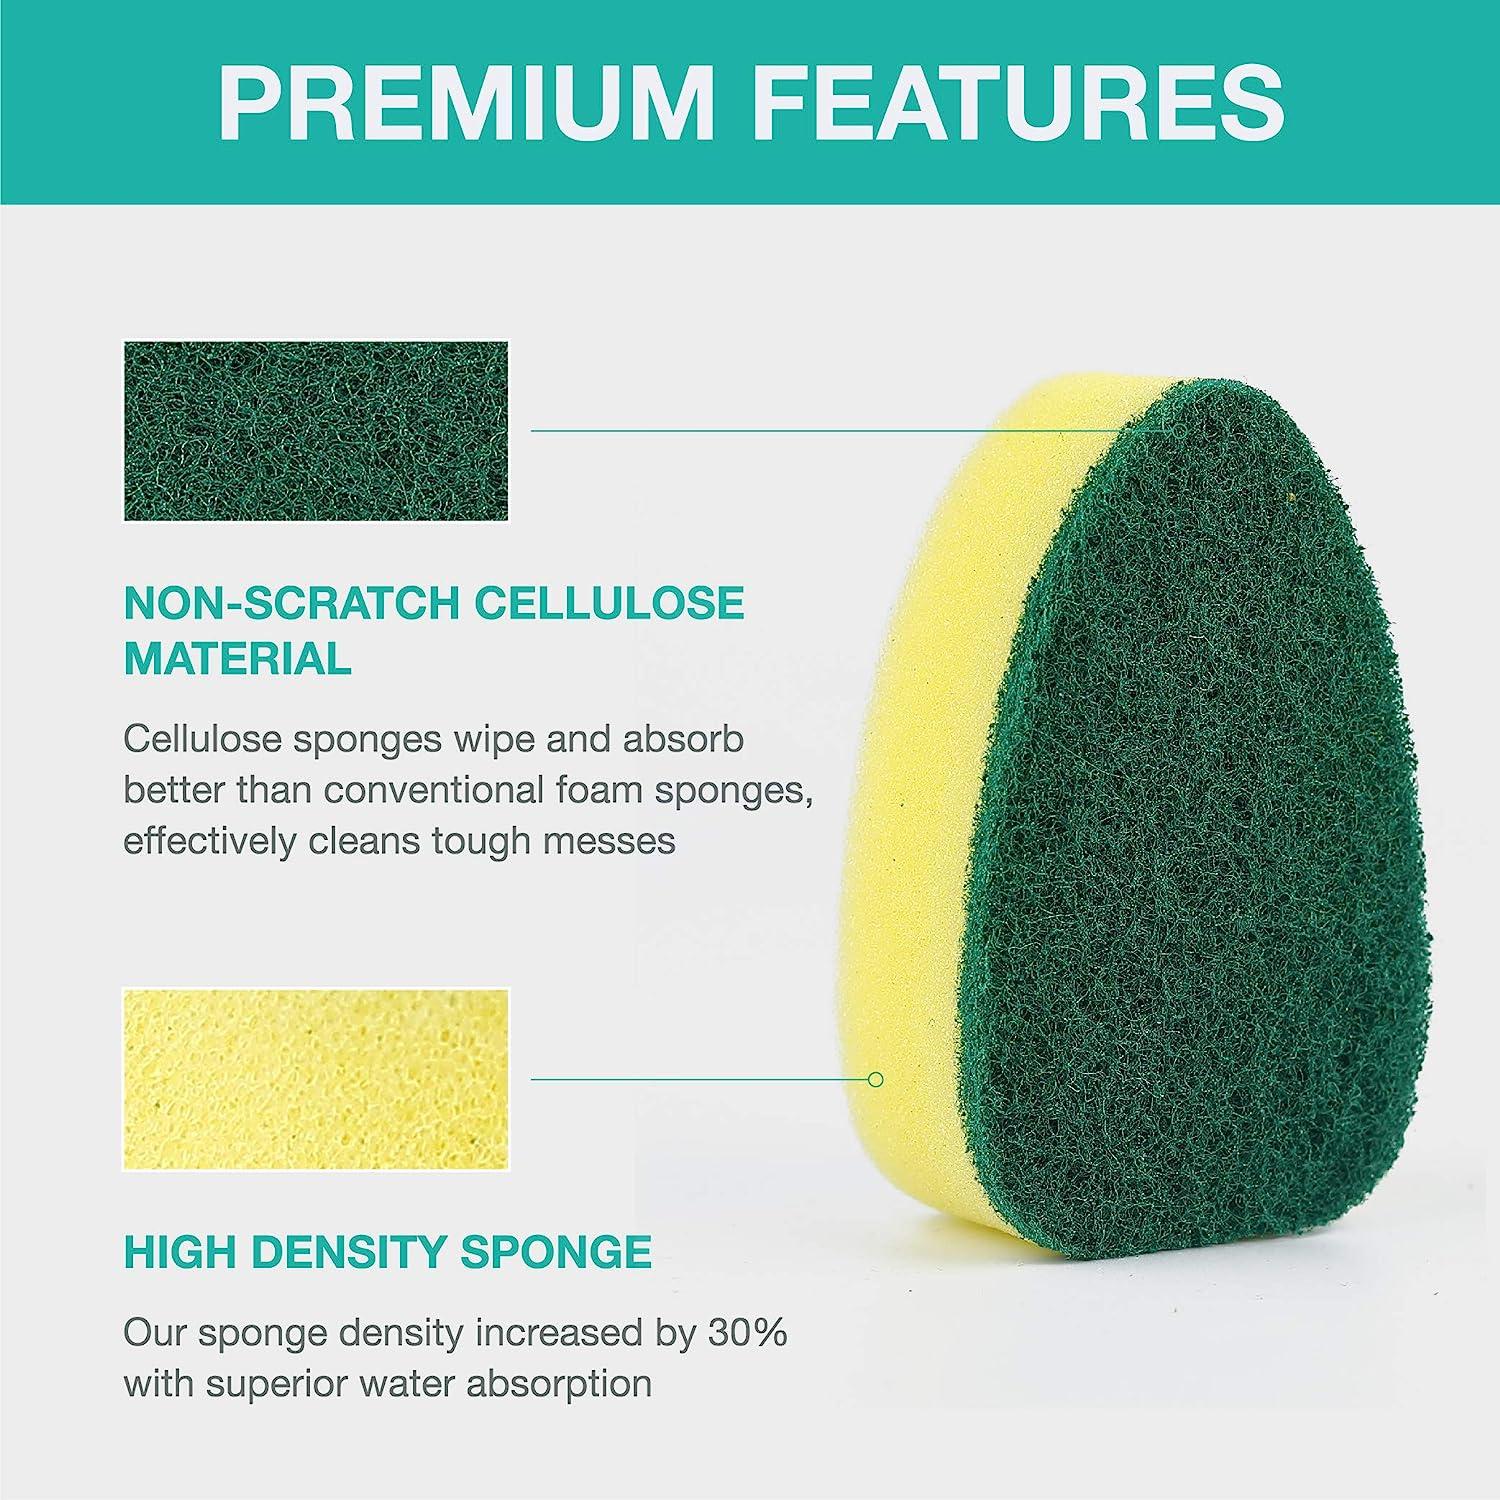 Dish Wand Refills Sponge Heads Brush Replacement Sponge Refill Sponge Pads  for Kitchen Cleaning Sponges